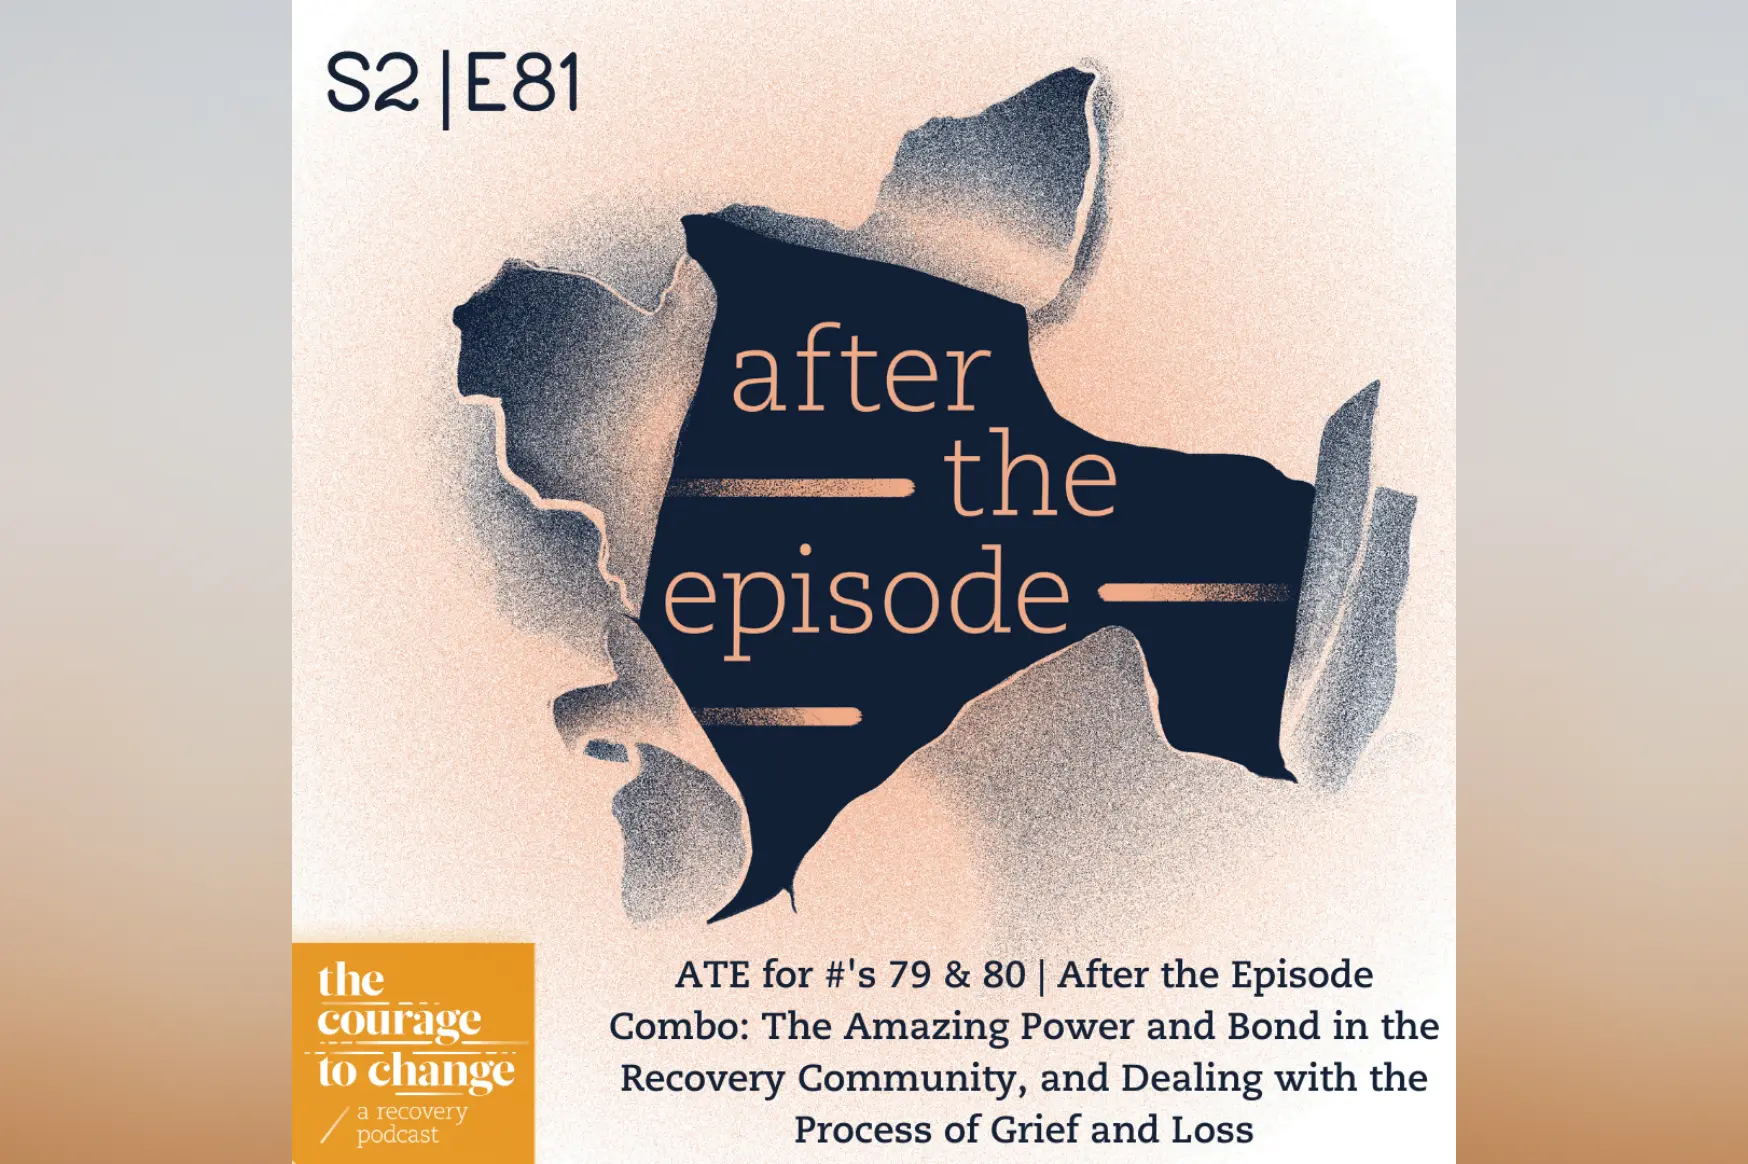 #81 - After the Episode